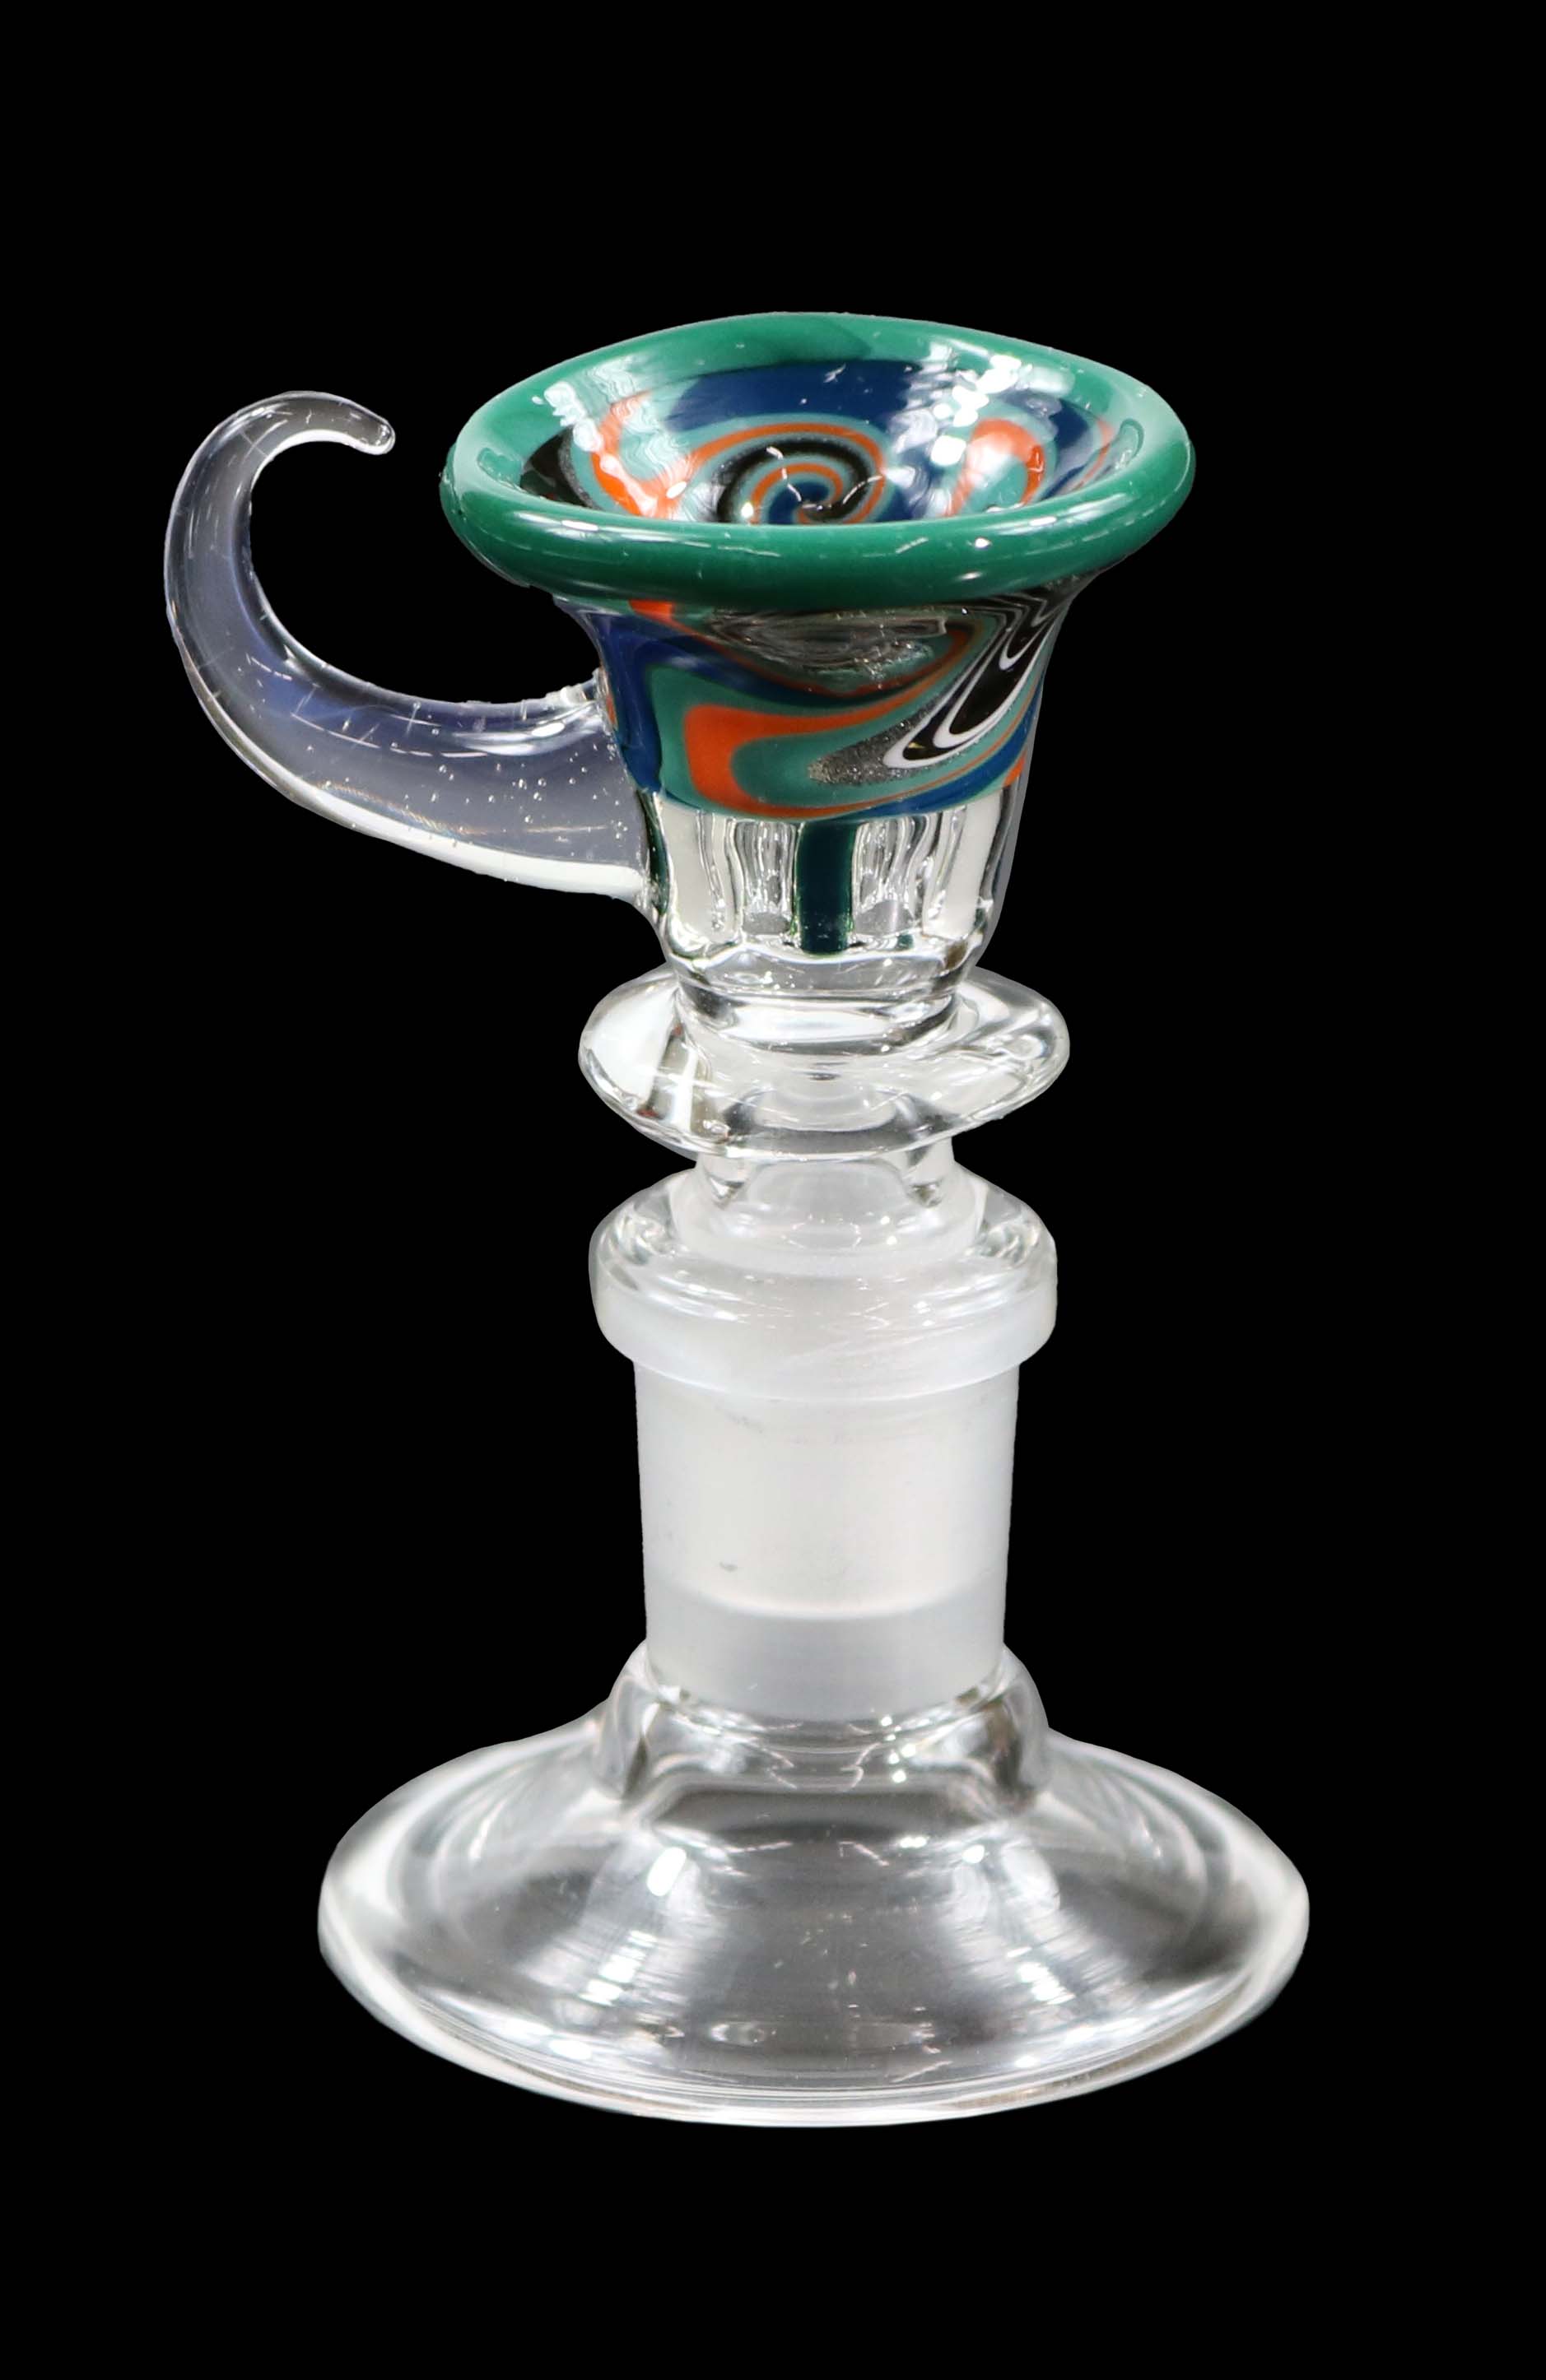 14mm Martini Bong Slide with built in colored screen from Glass by Slick - Teal/Orange/Blue